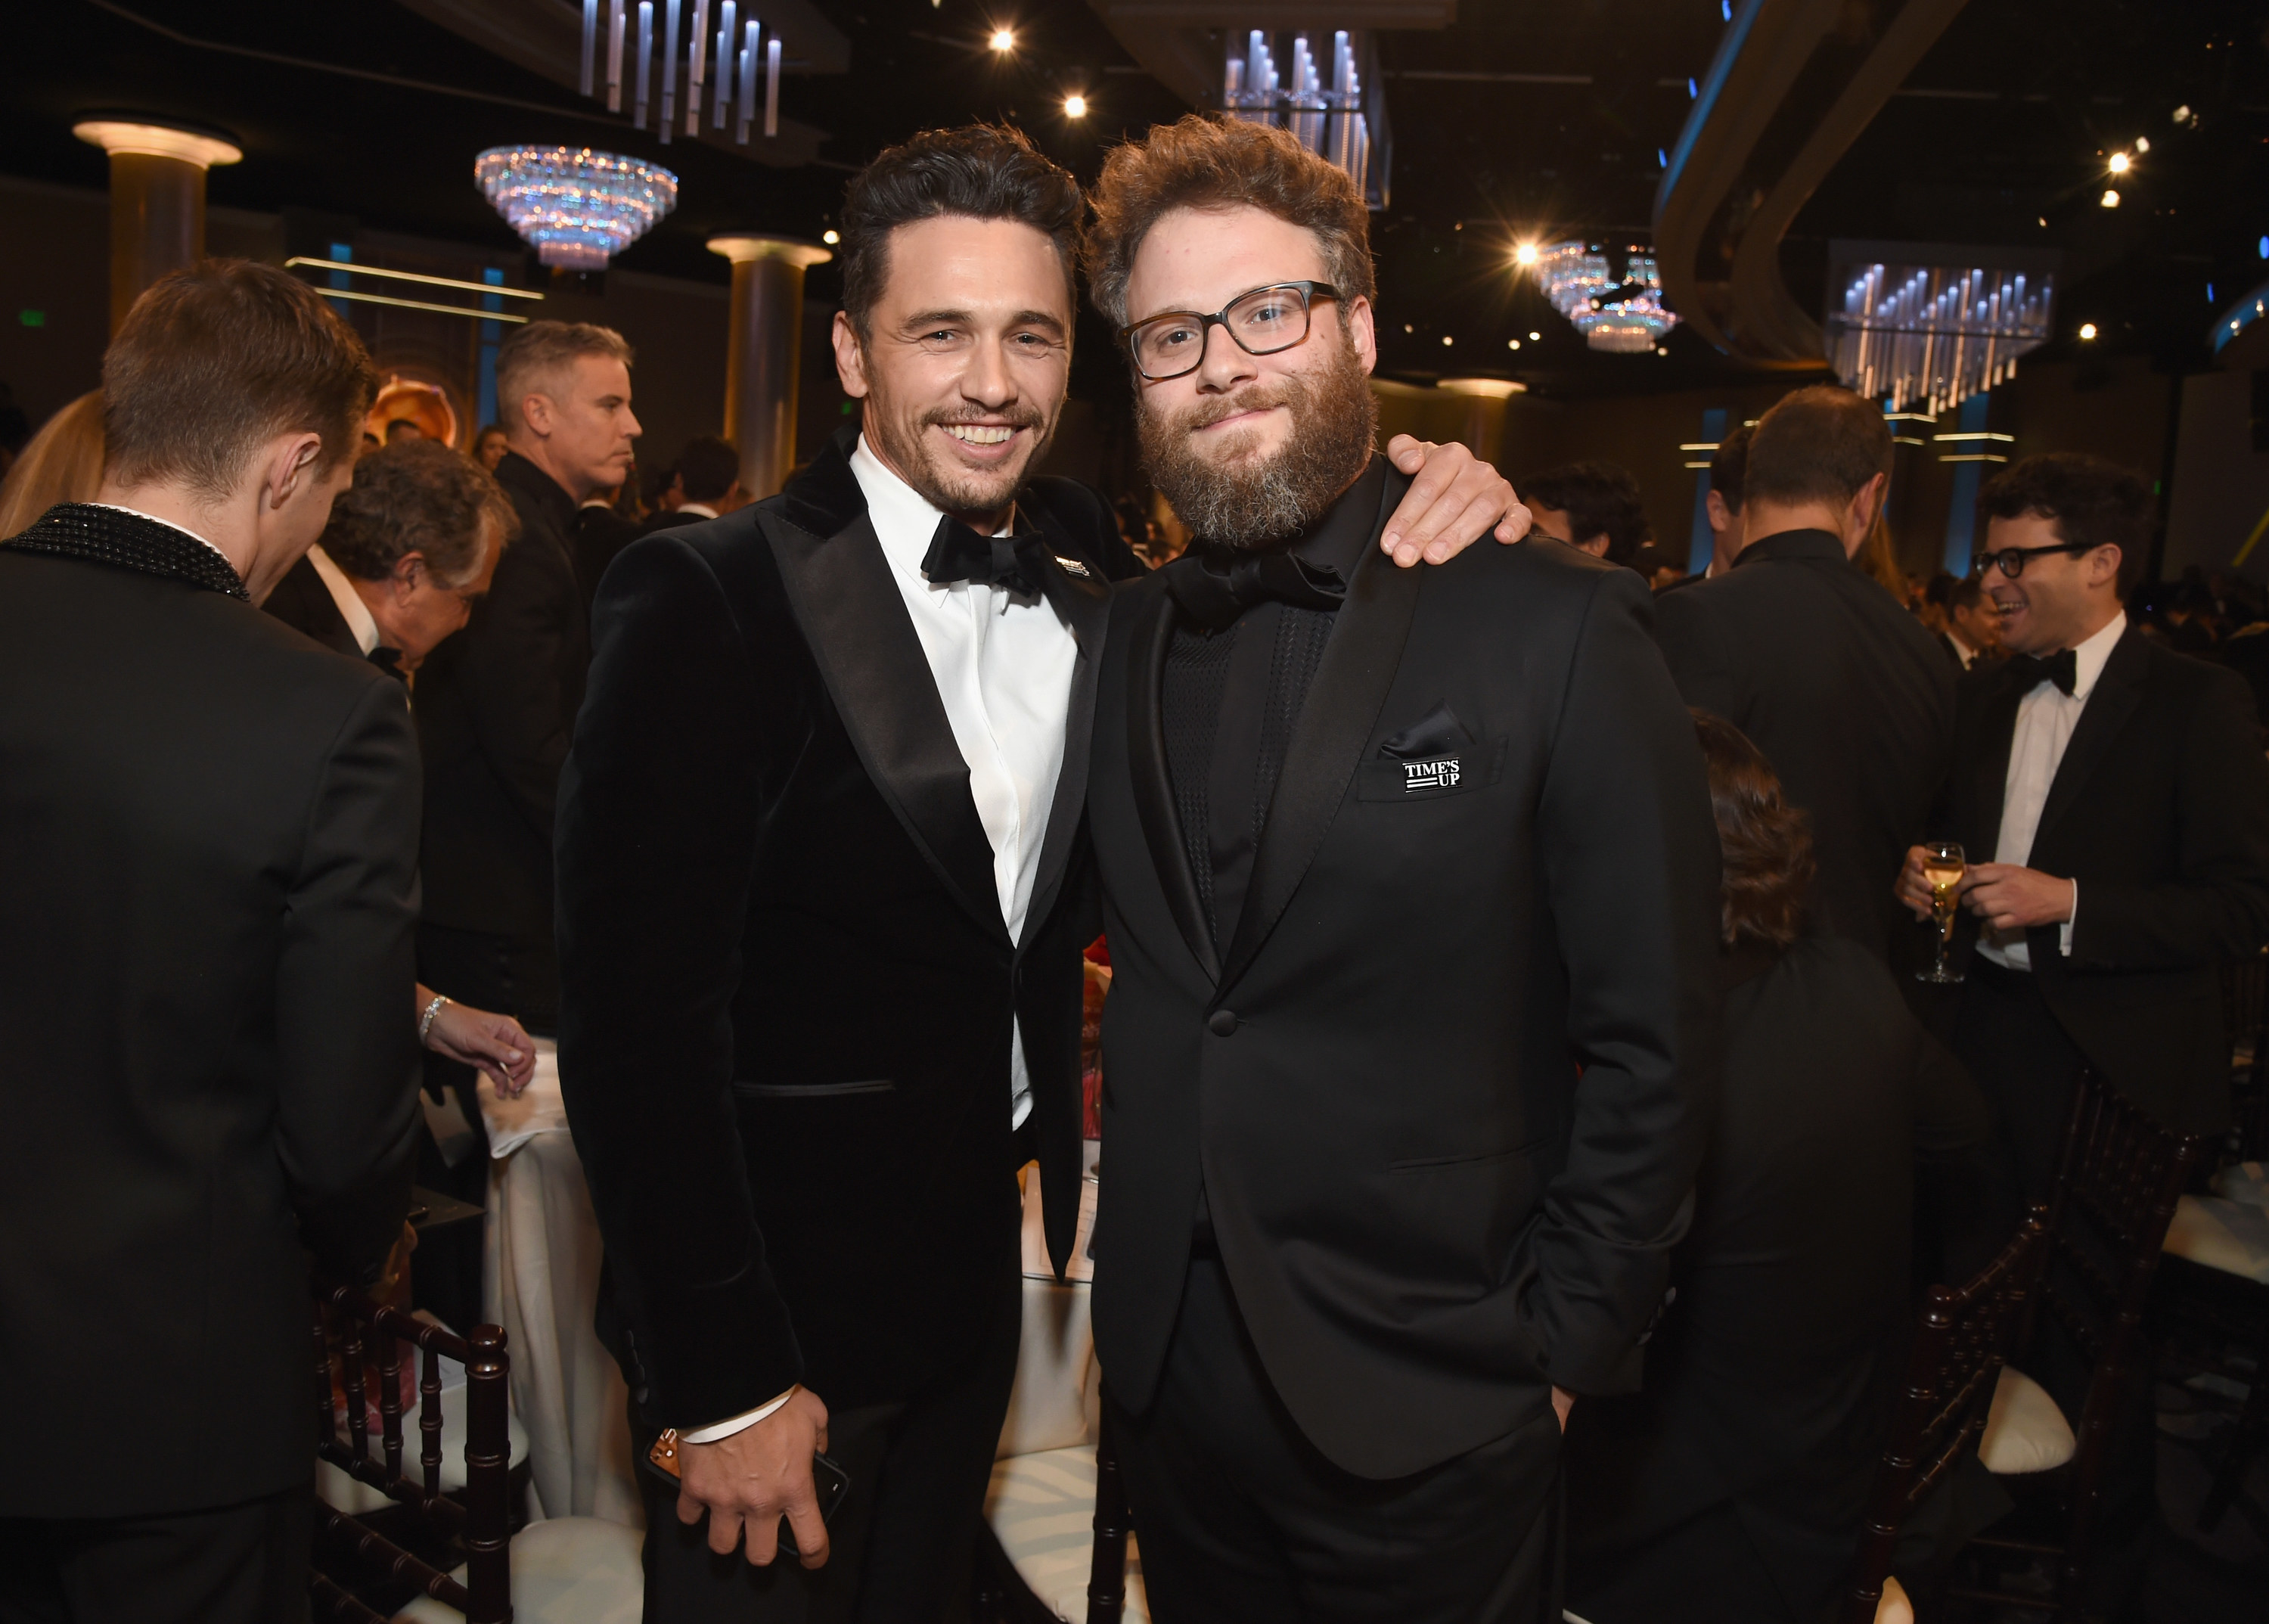 James Franco and Seth Rogen at the 75th Golden Globe Awards in 2018